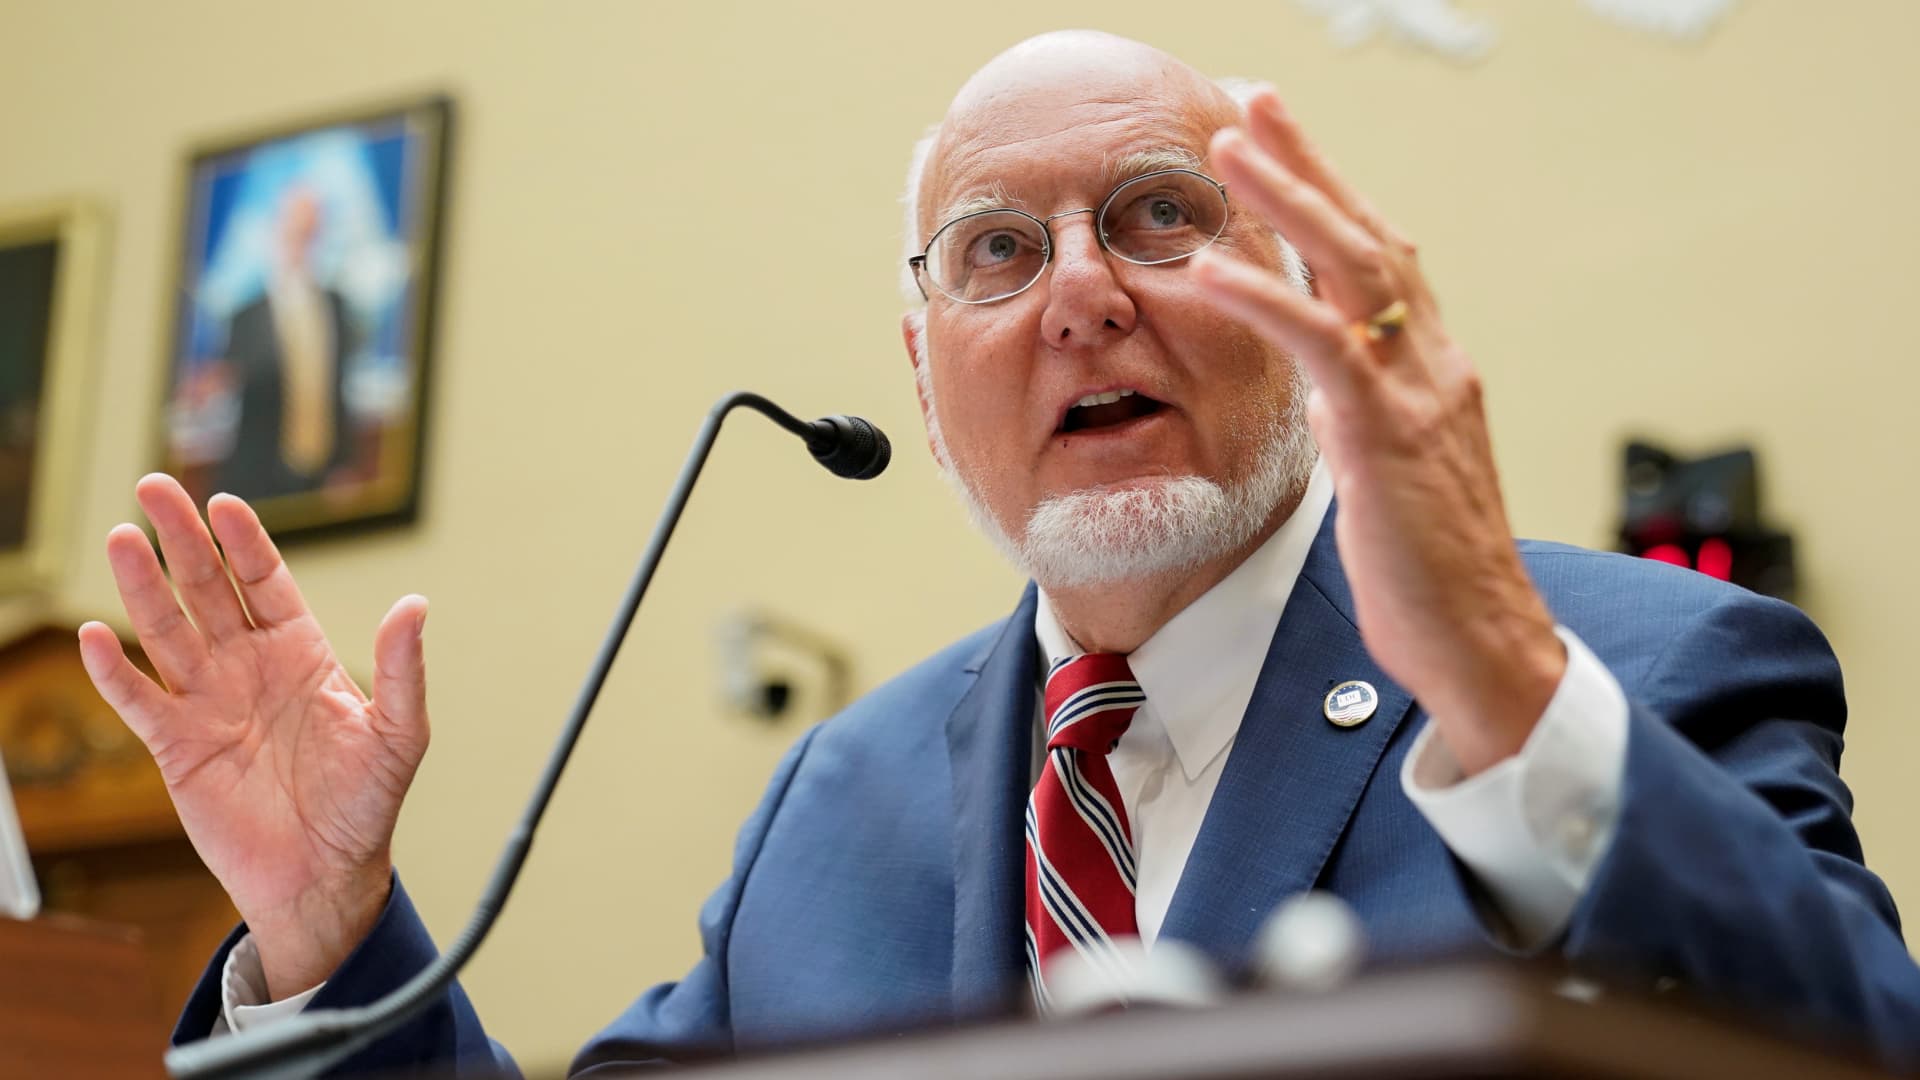 Robert Redfield, director of the Centers for Disease Control and Prevention (CDC), speaks during a House Select Subcommittee on the Coronavirus Crisis hearing in Washington, D.C., July 31, 2020.